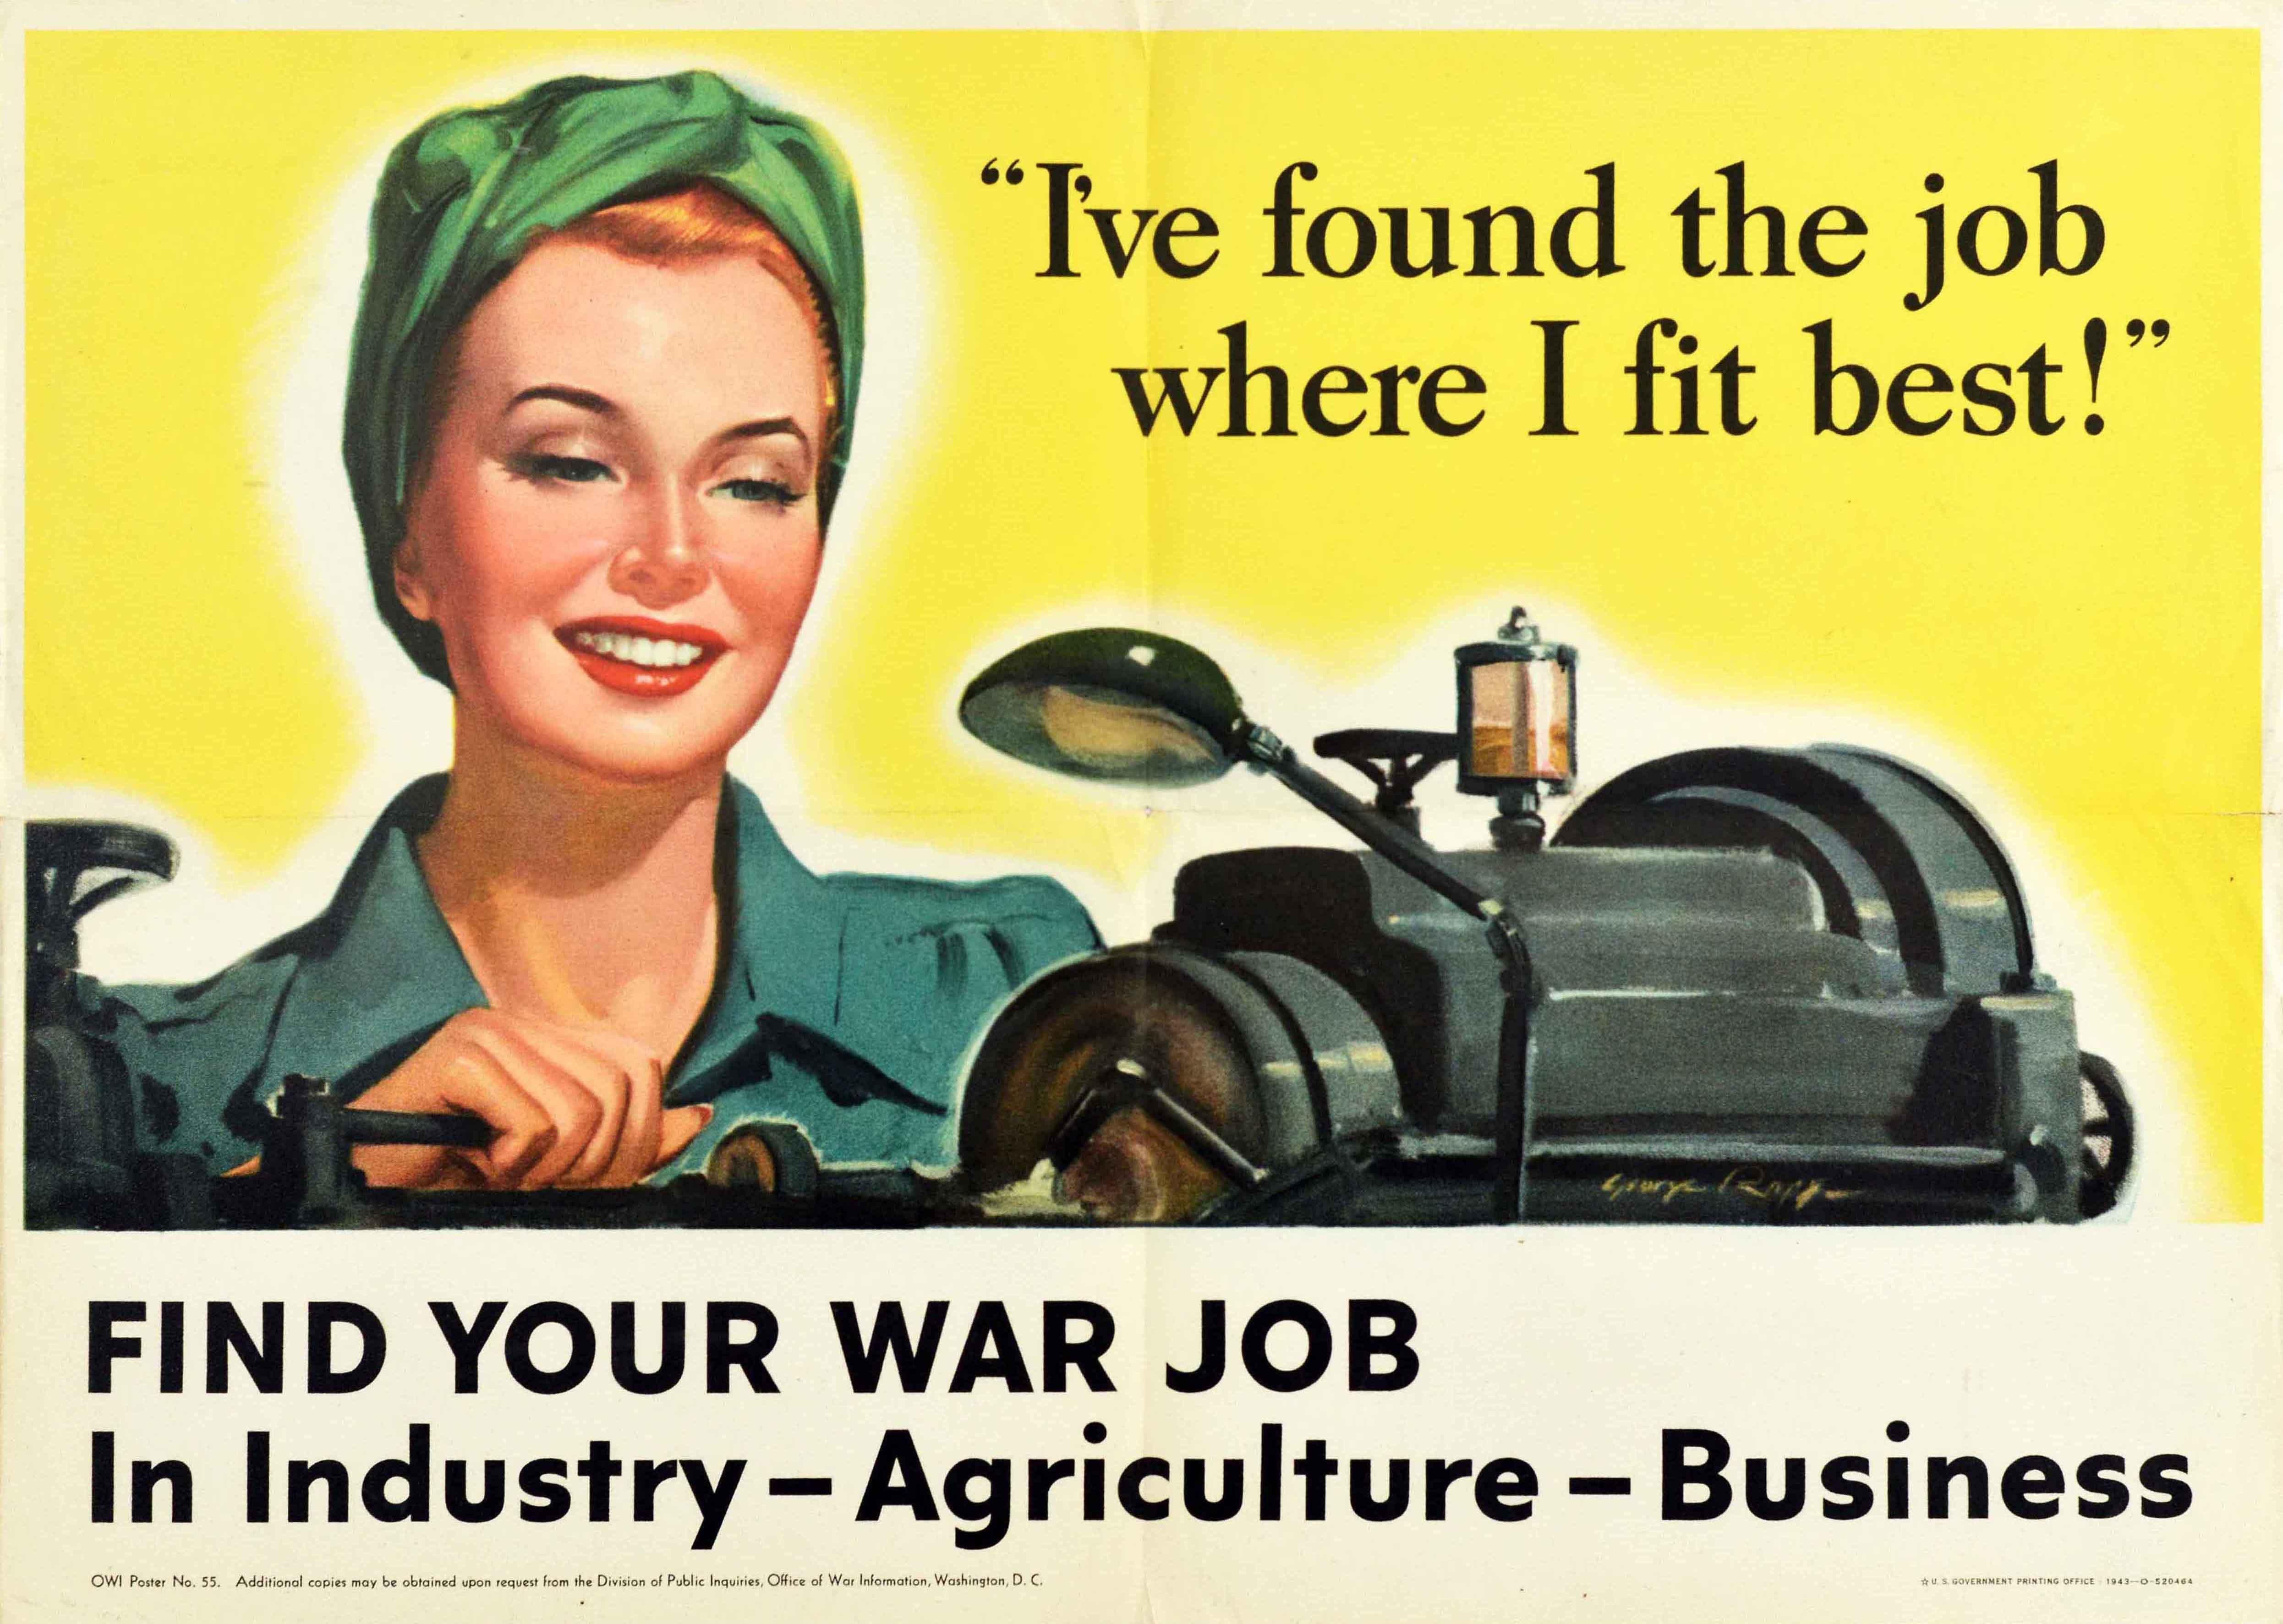 Original vintage World War Two propaganda poster distributed by the Office of War Information to encourage employment on the home front featuring an illustration of a smiling lady in uniform working at a factory machine captioned - I've found the